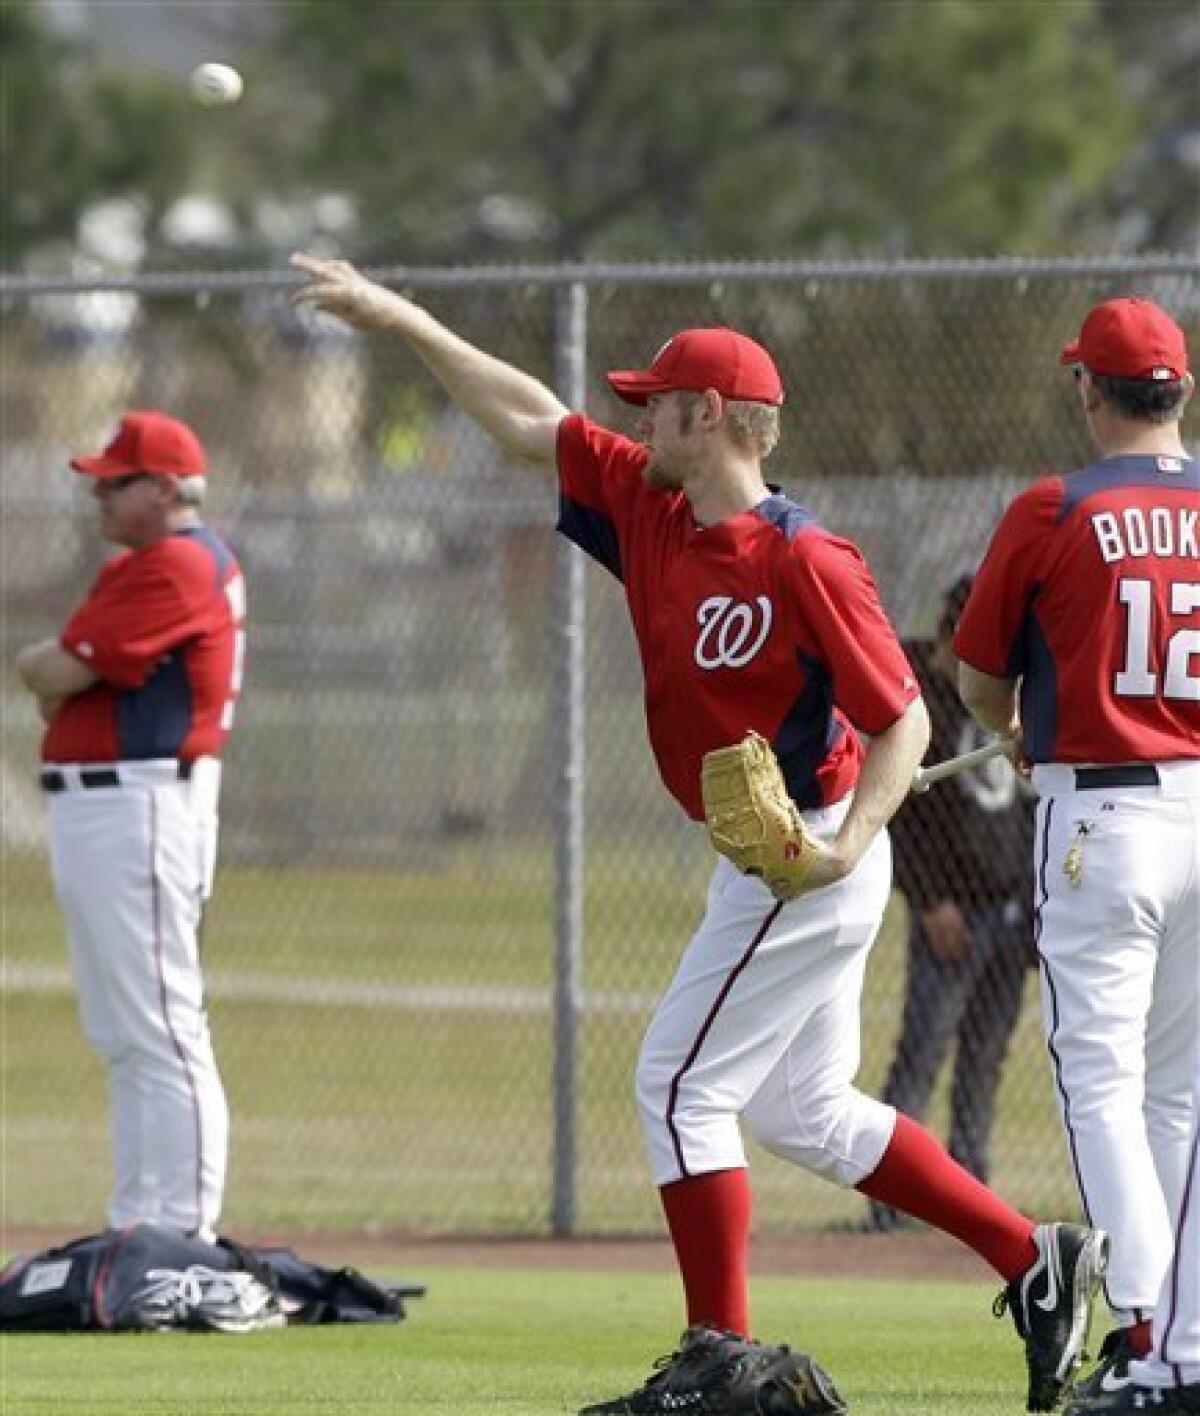 Stephen Strasburg will make his spring debut Tuesday for